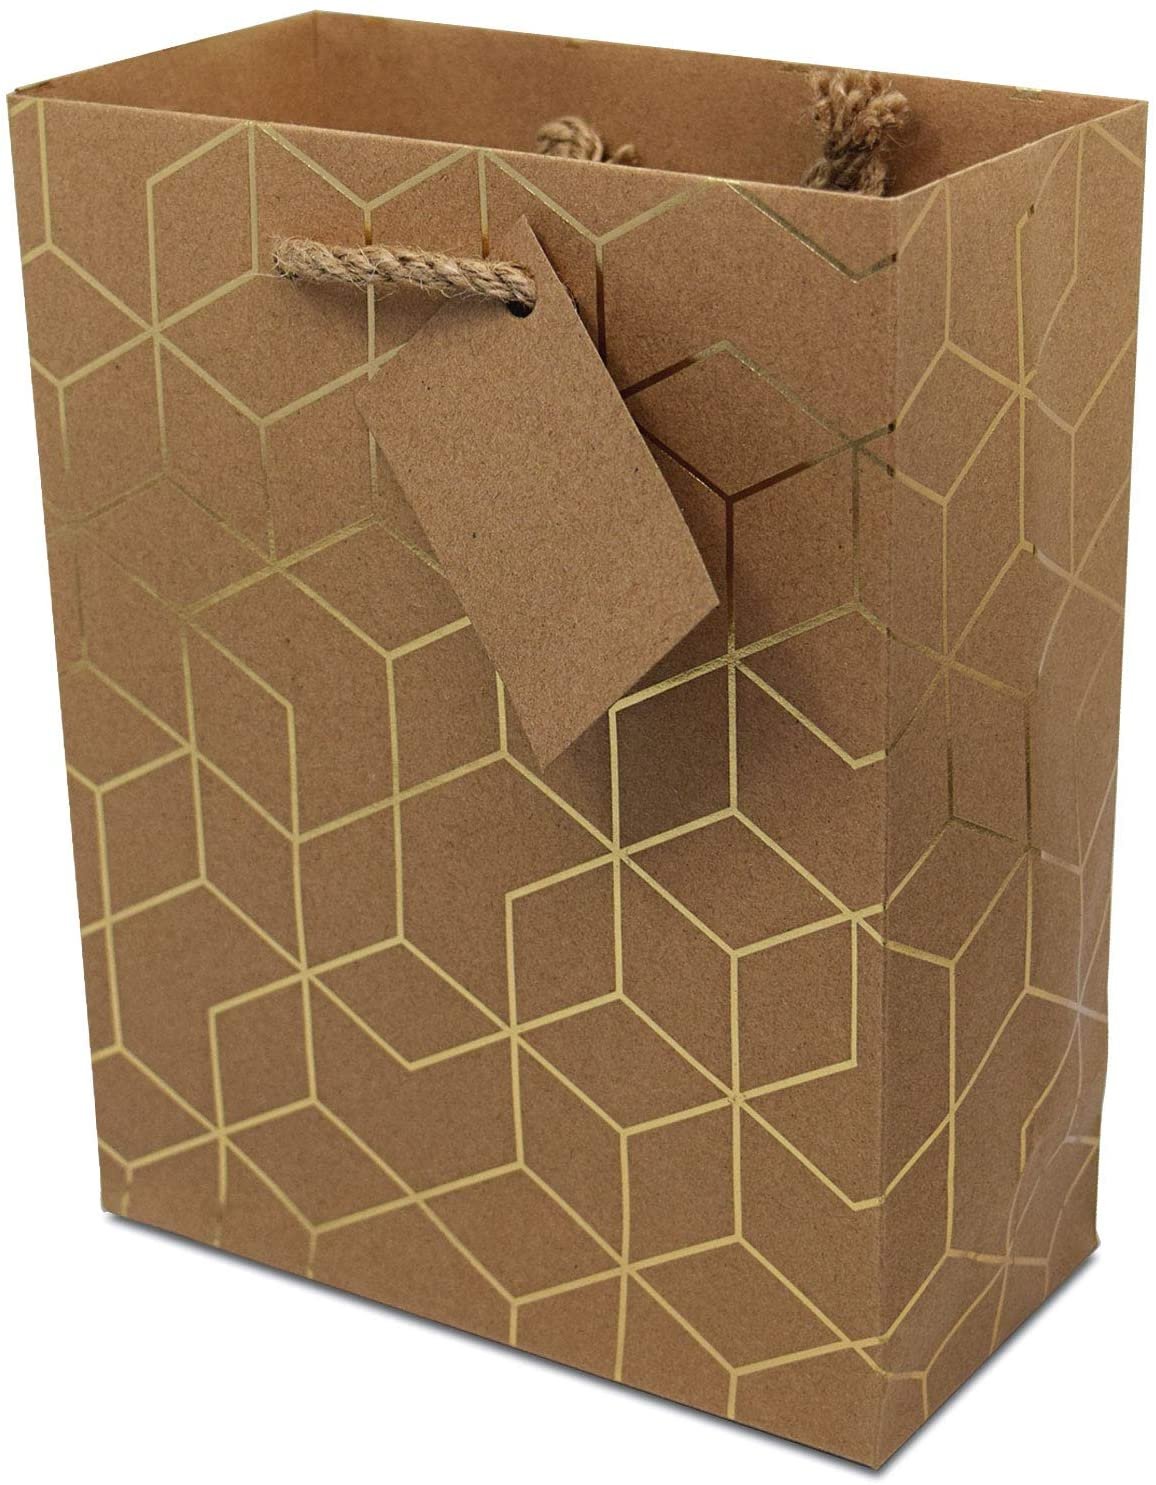 Gold Geometric Designer Gift Bags - 12 Pack Medium Size 7.5x3.5x9 Inch - Handles, Wrap Euro Totes for Birthdays, Parties, Holidays - Free Shipping